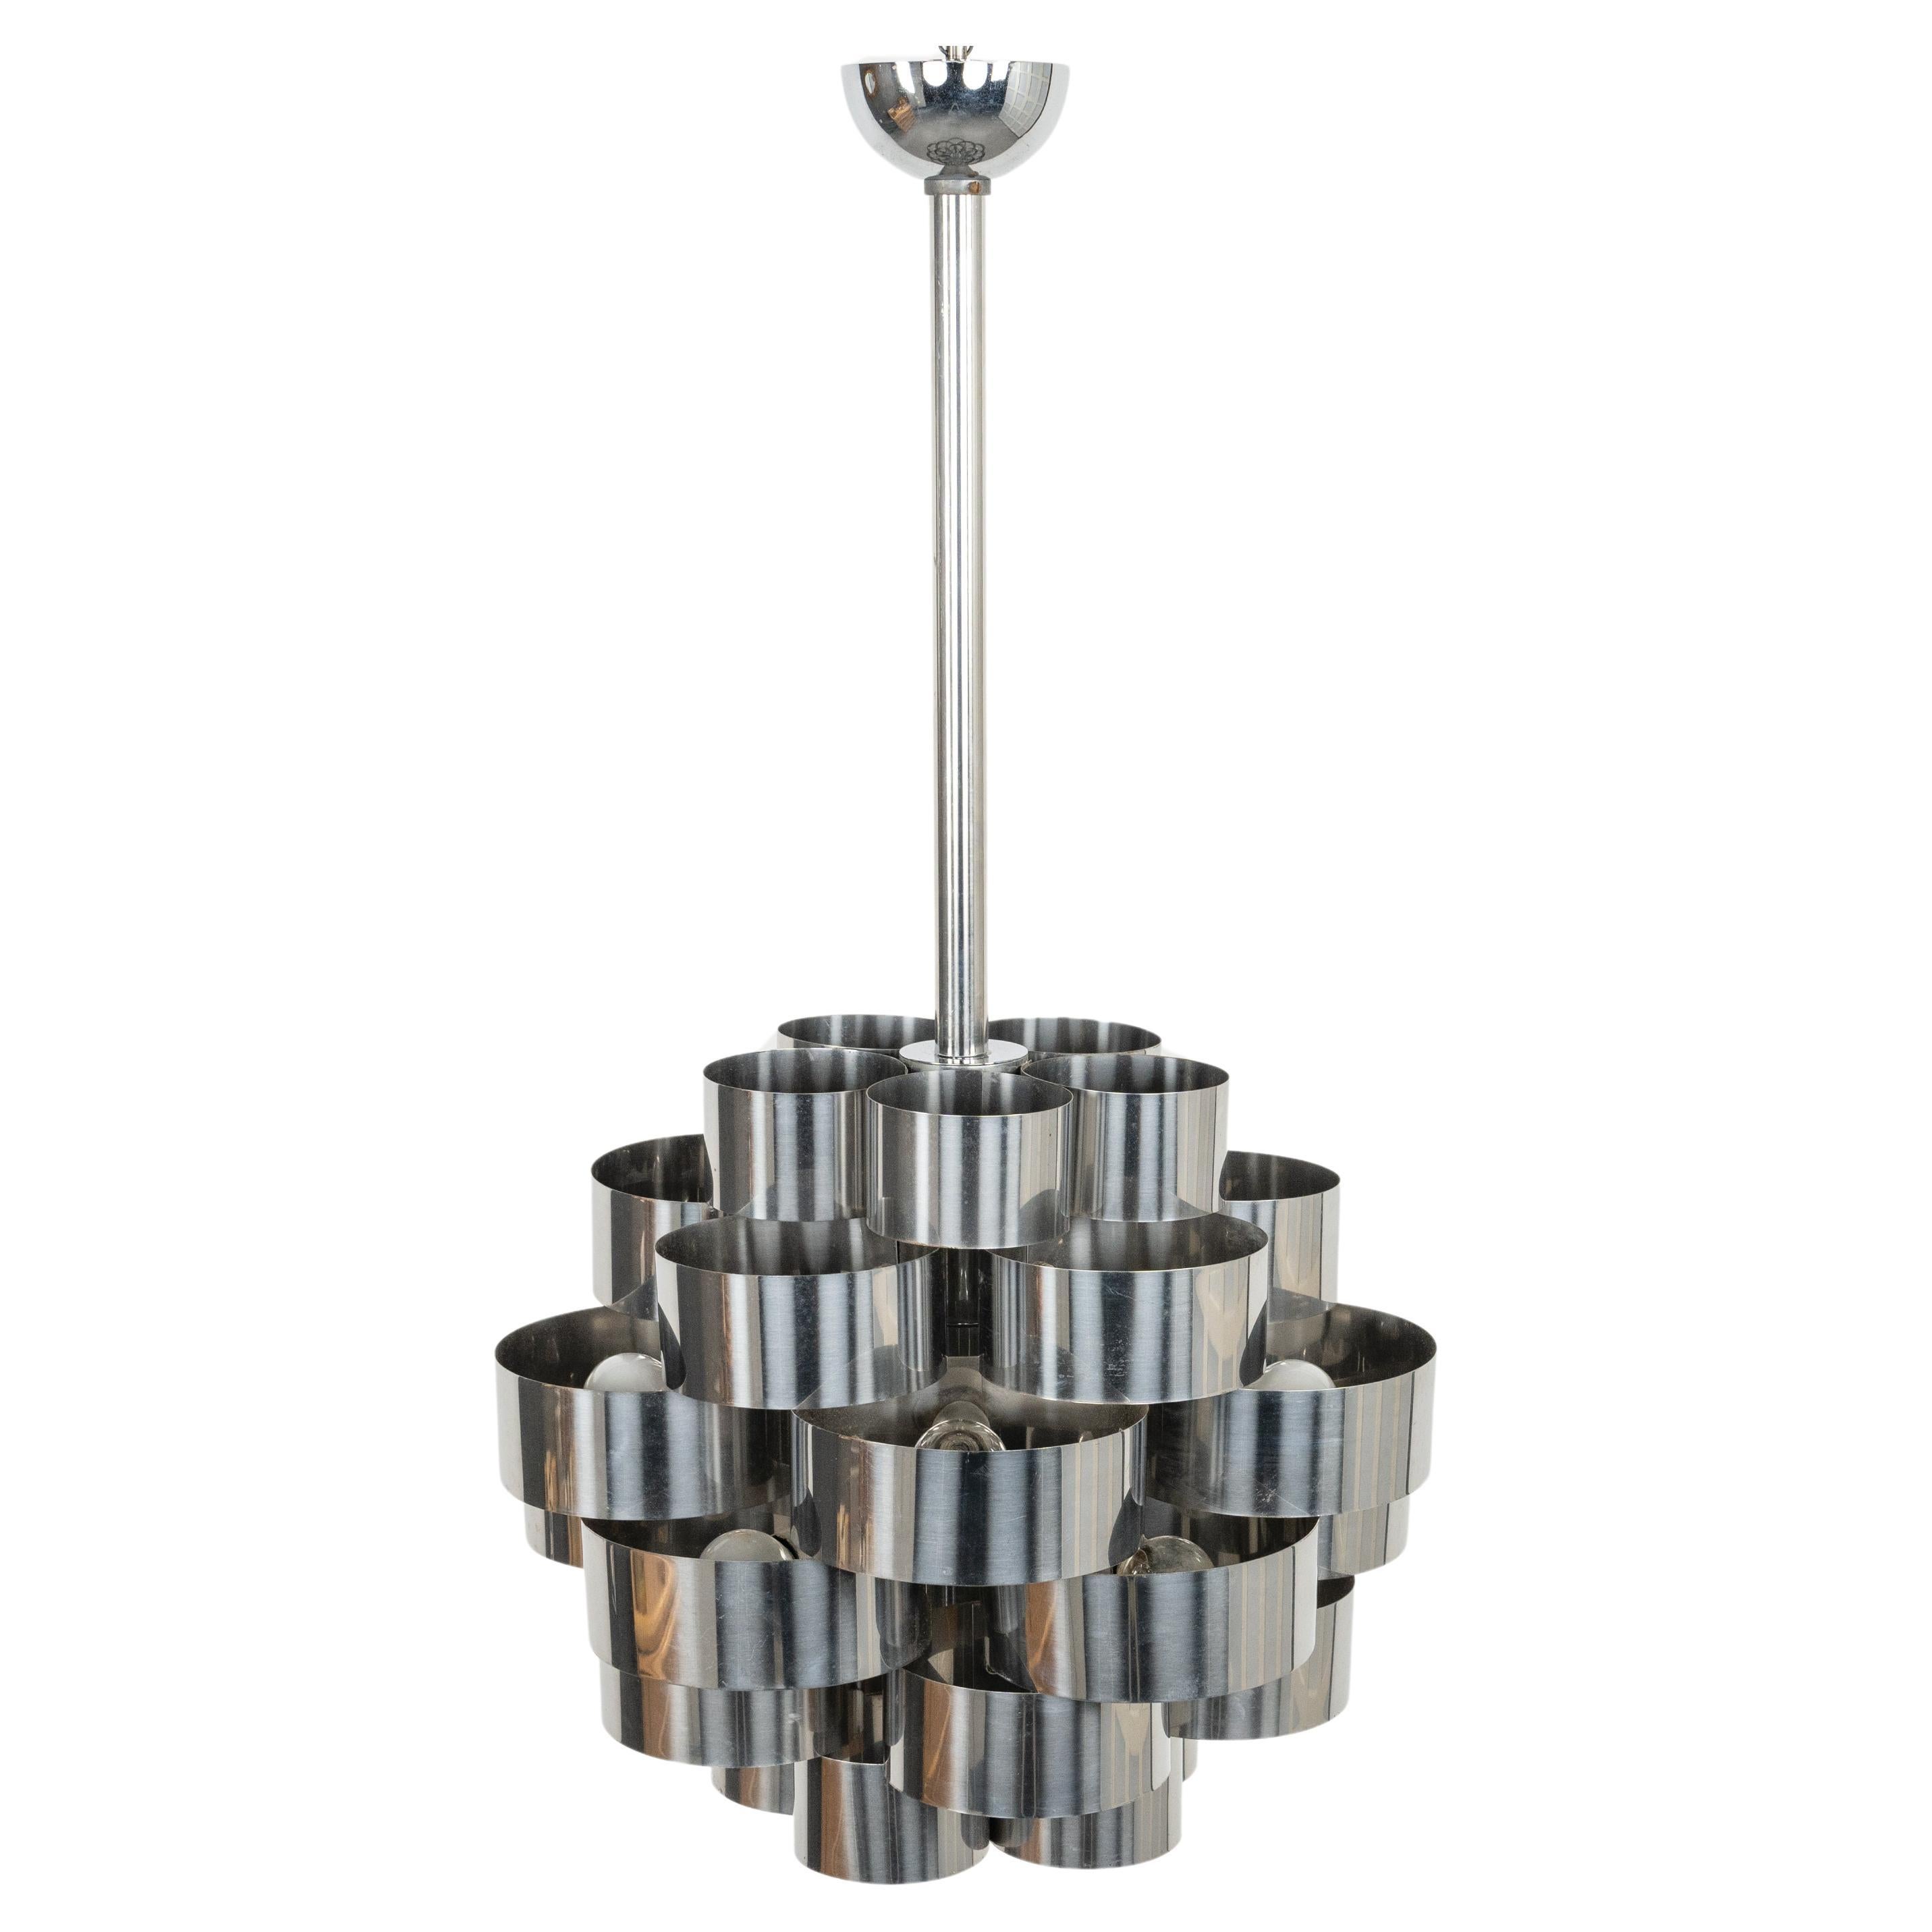 Midcentury Chandelier Aluminum and Steel by Max Sauze for Sciolari, Italy 1970s For Sale